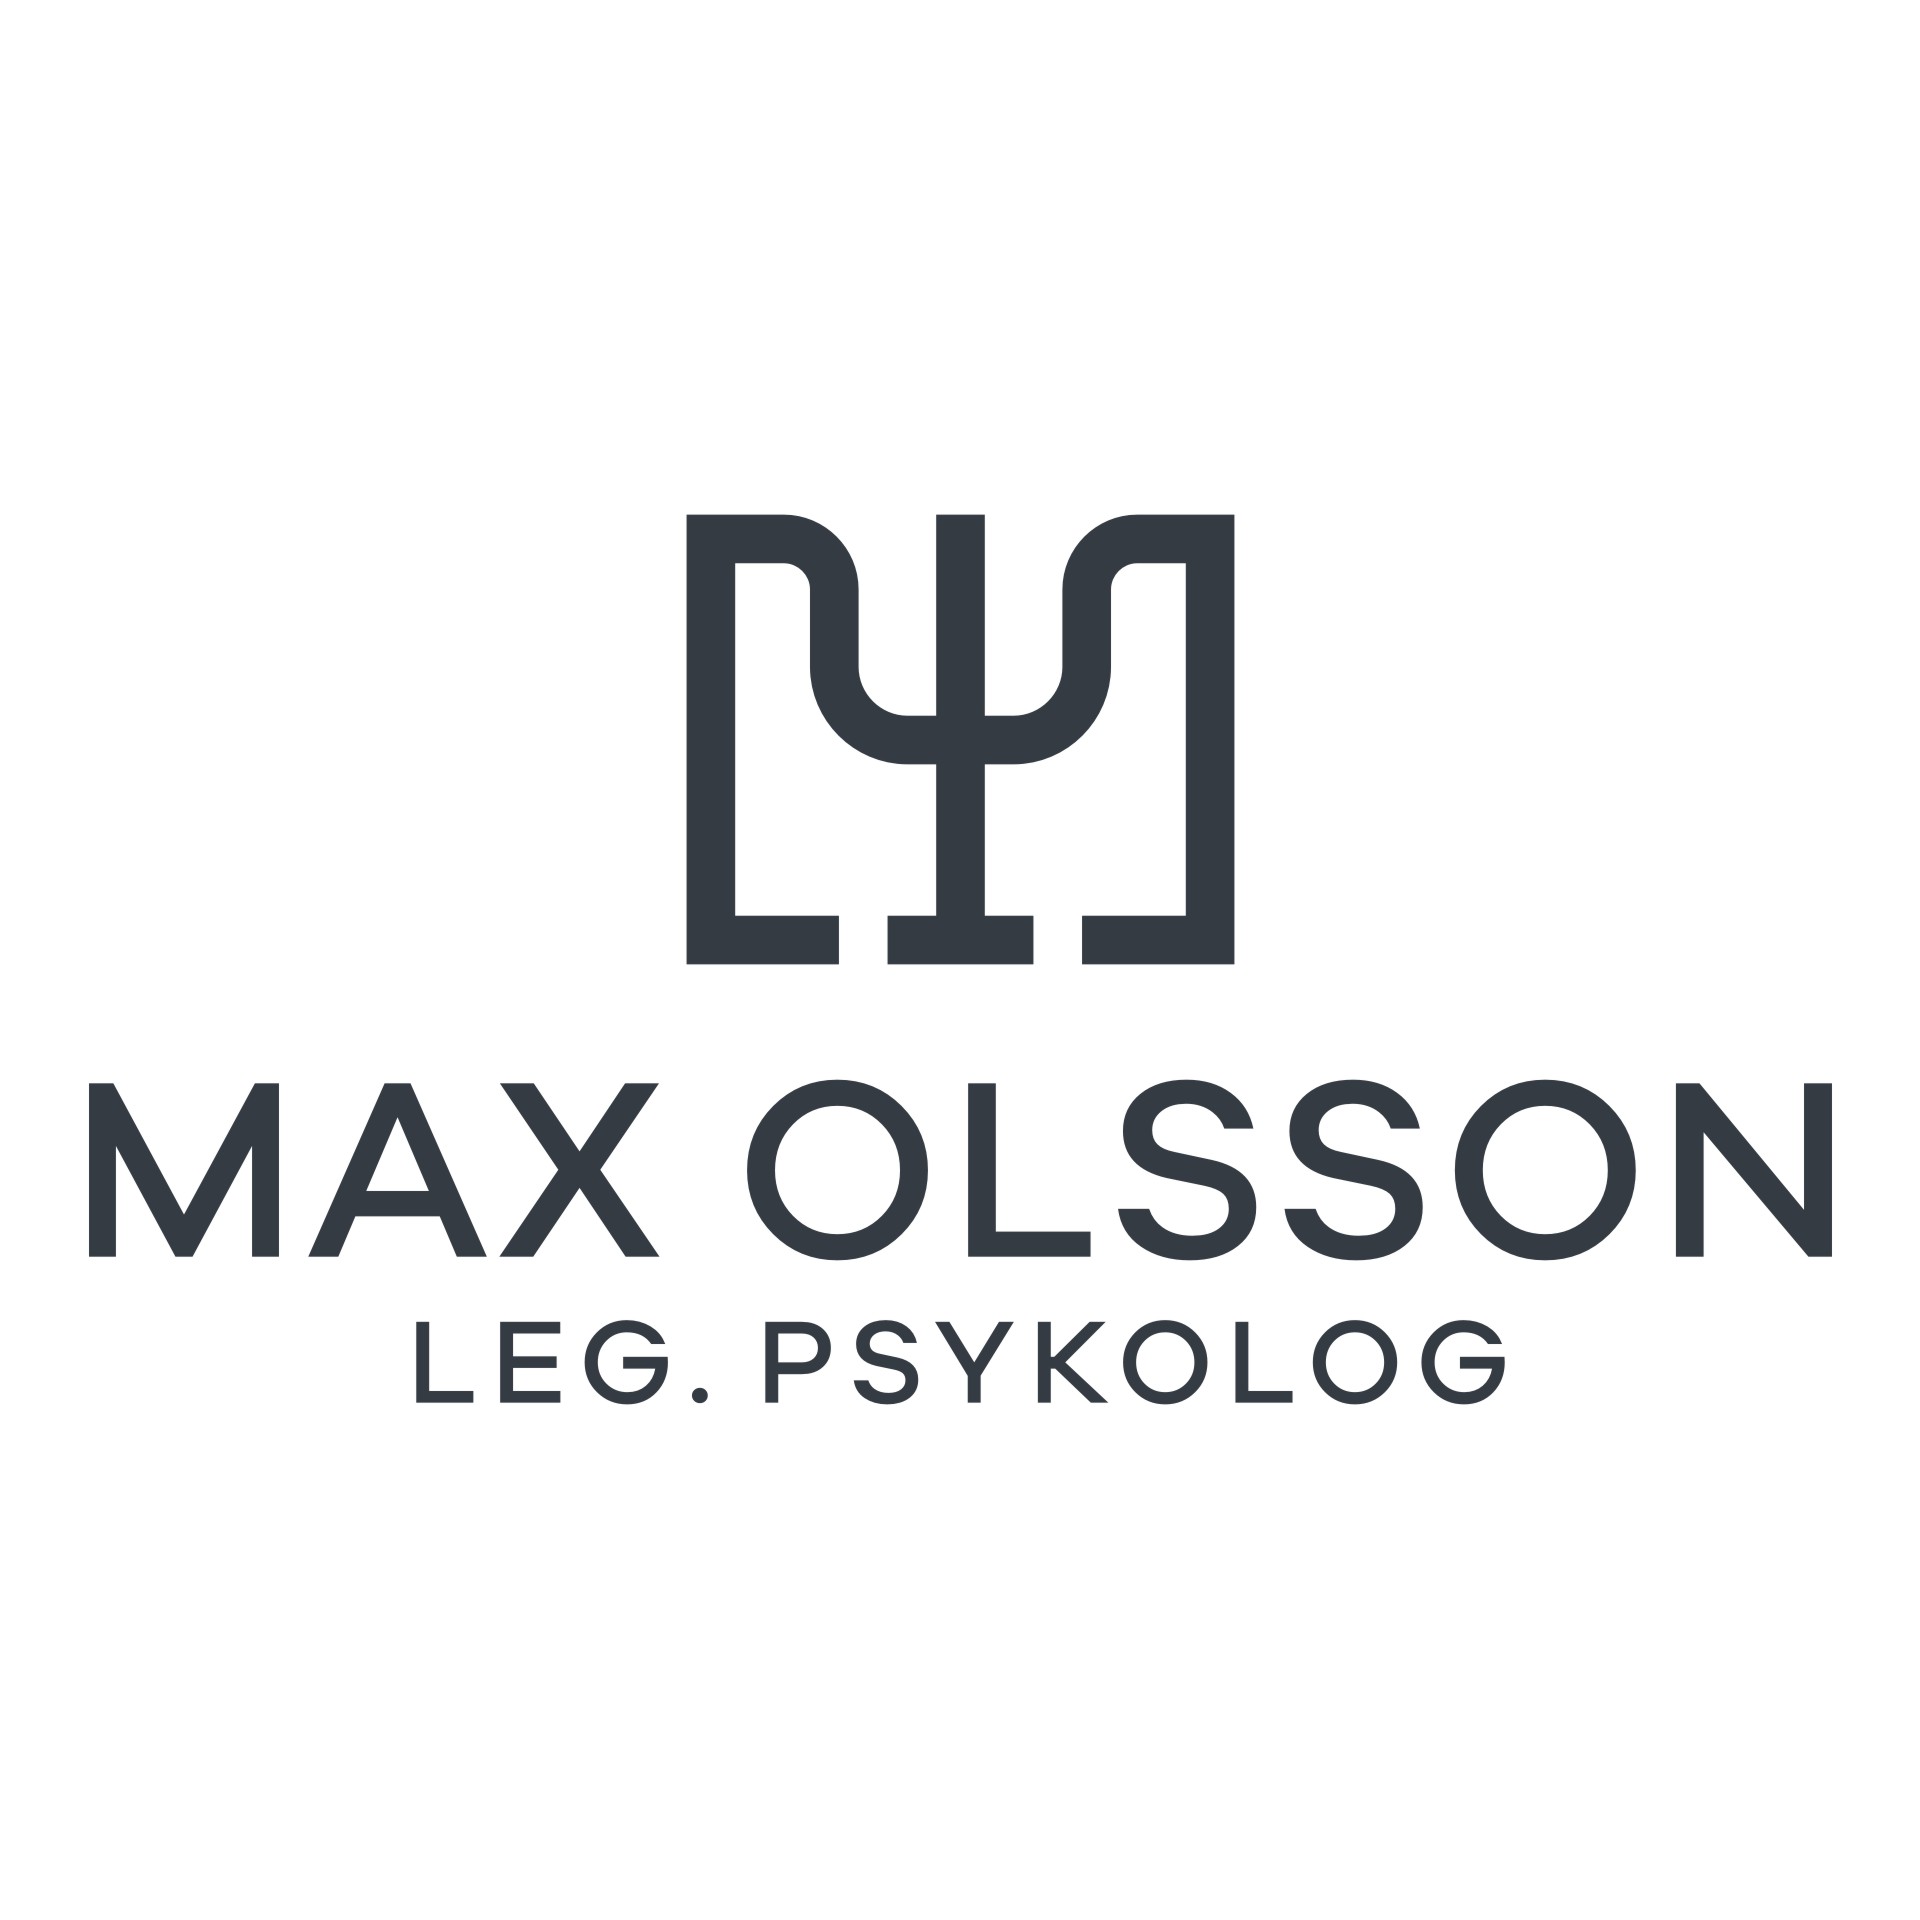 An image of Max Olsson